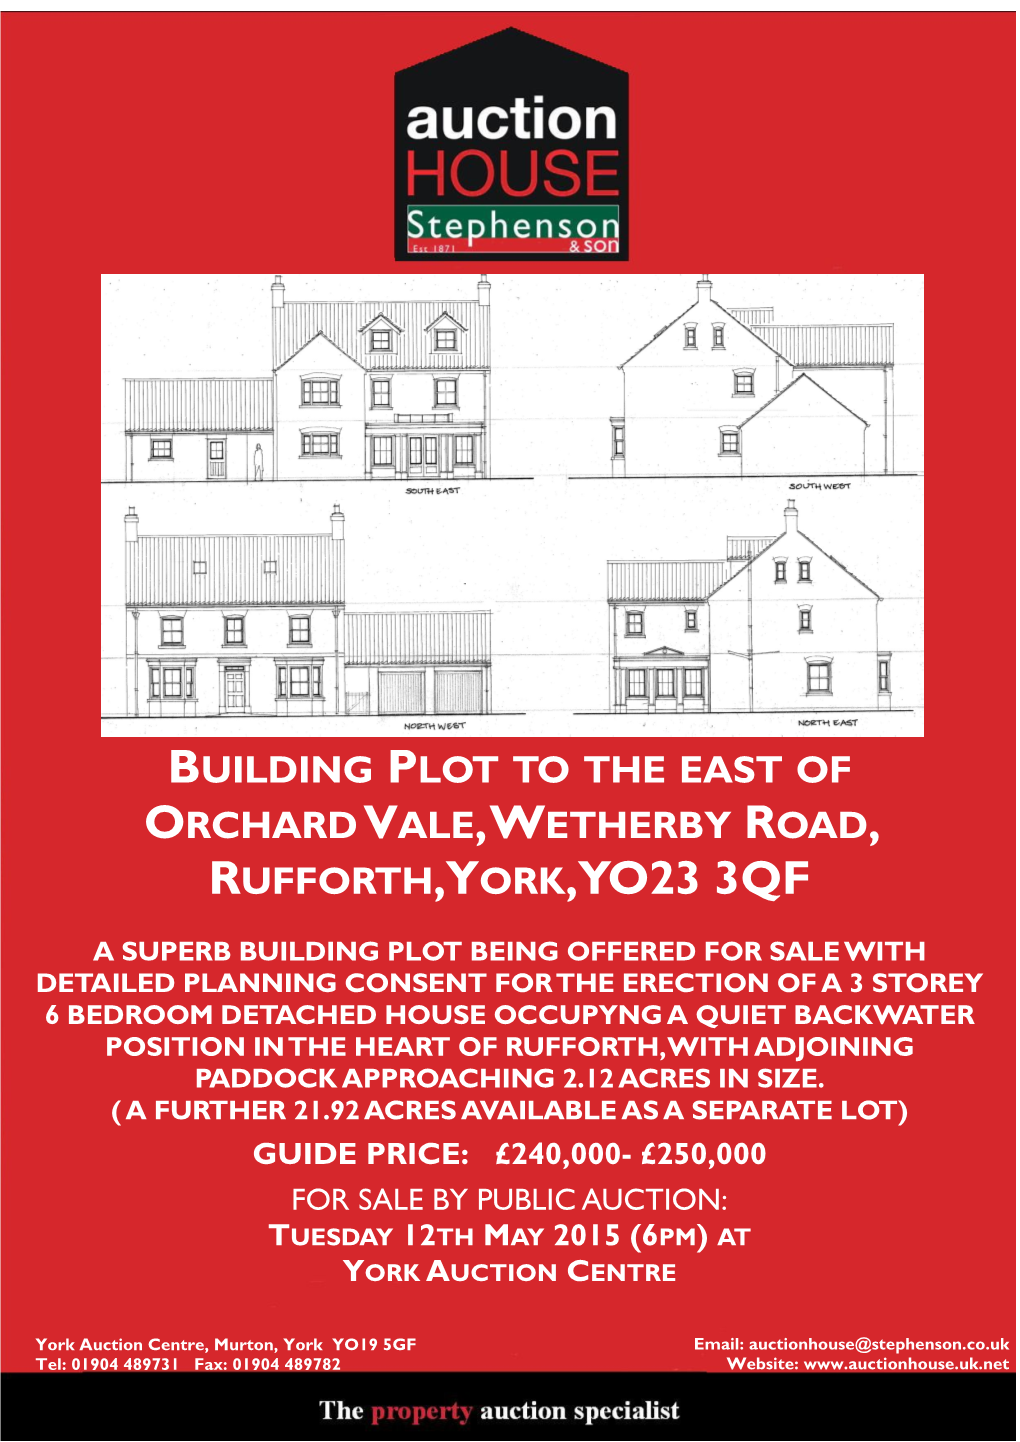 Building Plot to the East of Orchardvale, Wetherby Road, Rufforth, York, Yo23